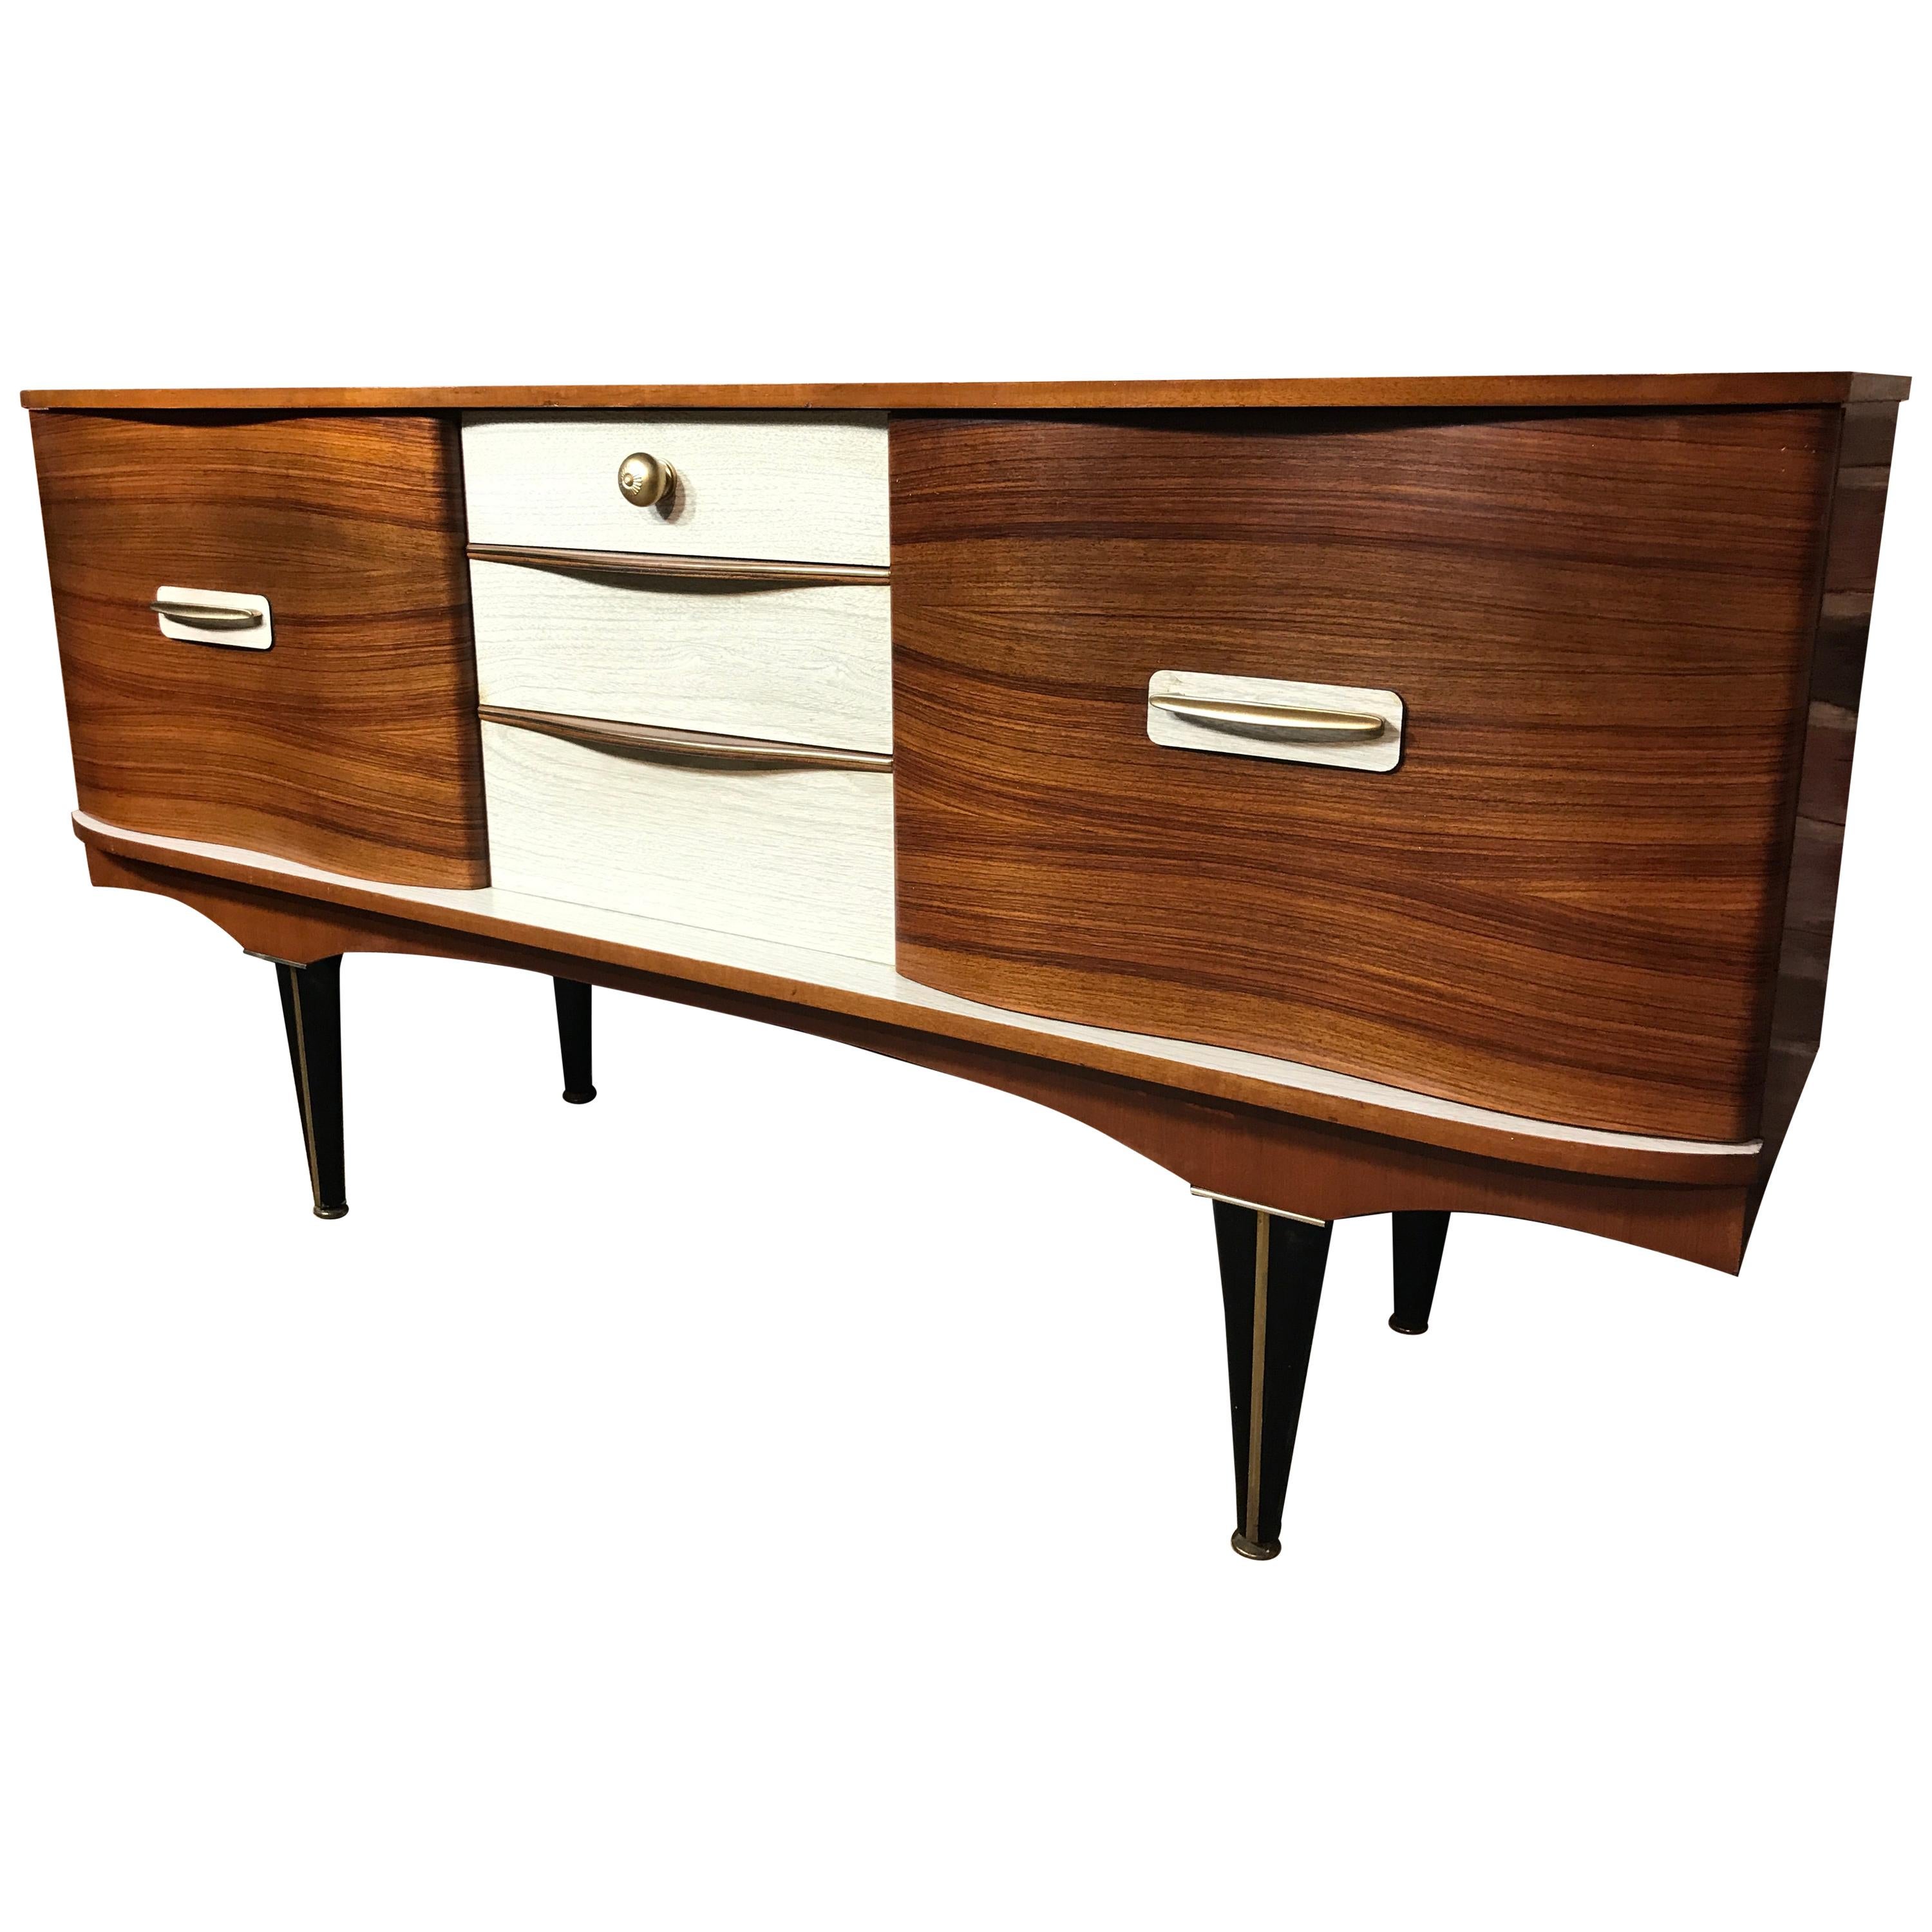 Sought After Vintage 1950 Retro Sideboard with Brass Handles and Ebonized Base